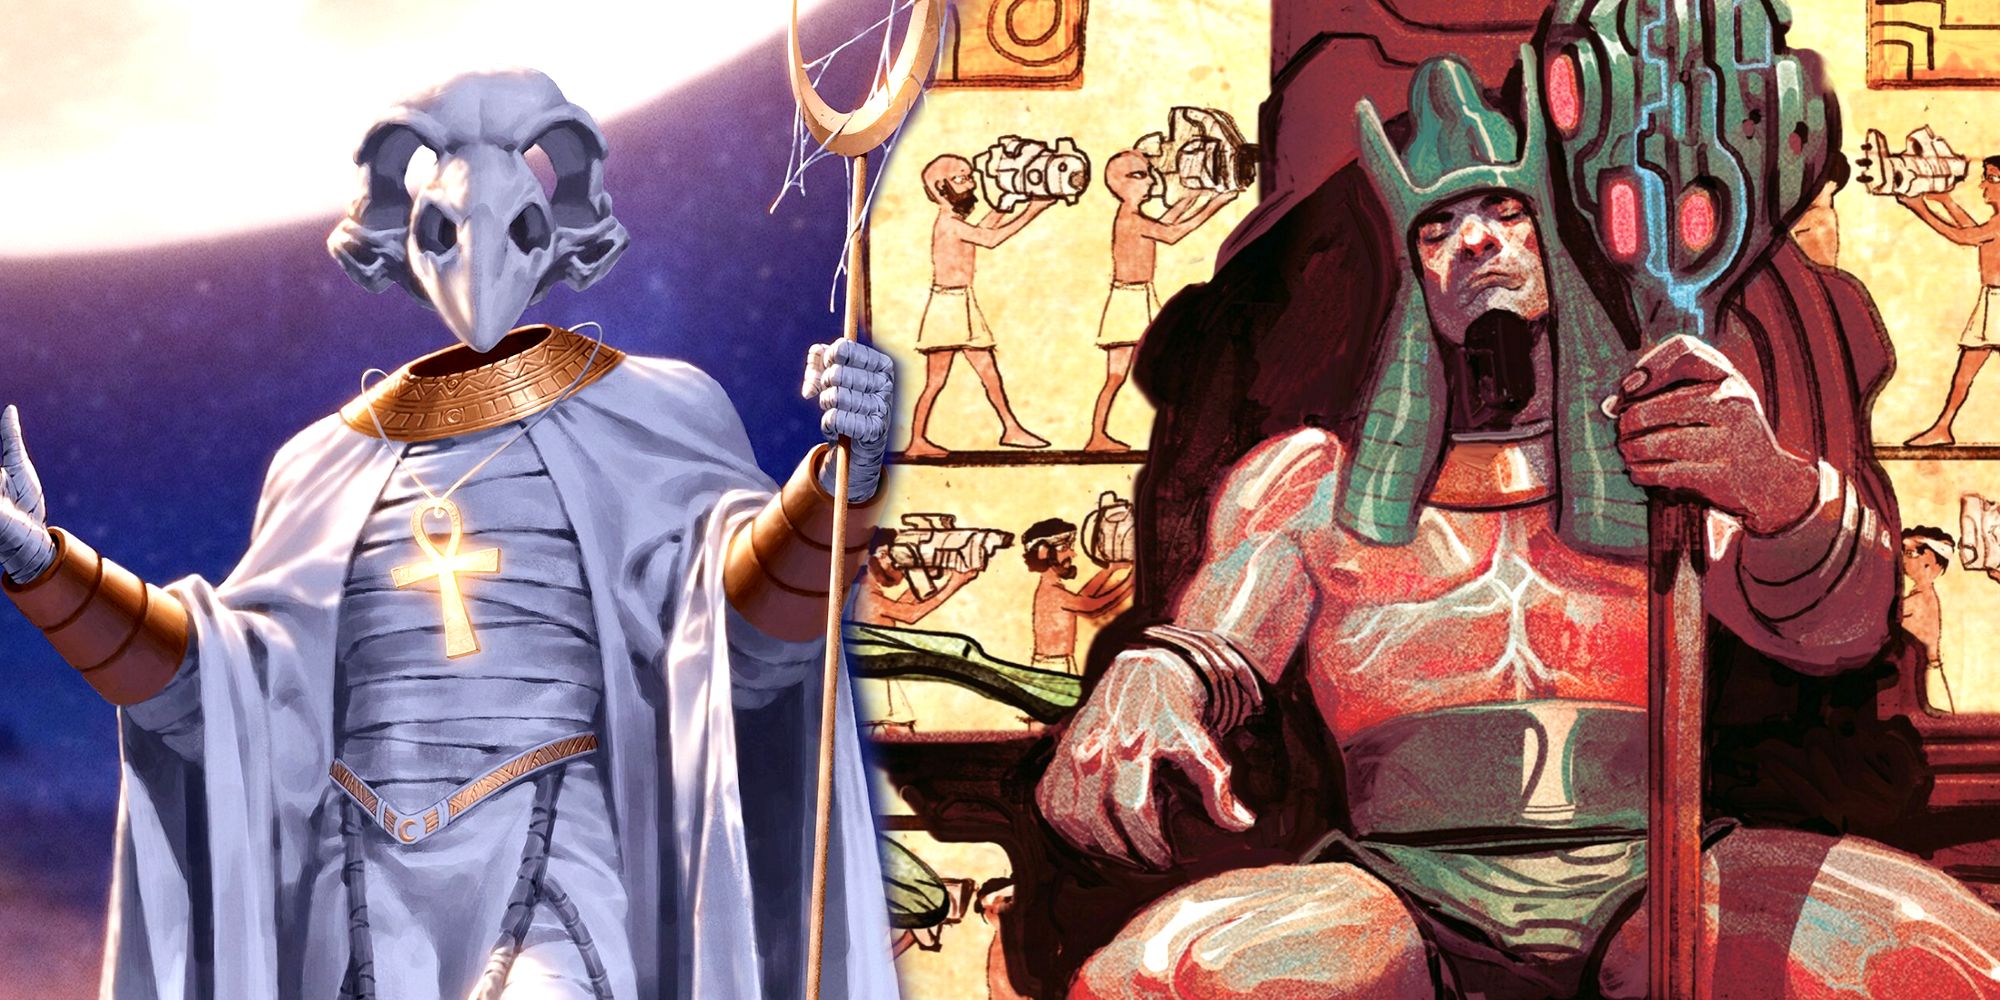 MCU’s Next Kang Variant Could Appear In Moon Knight Not Ant-Man 3